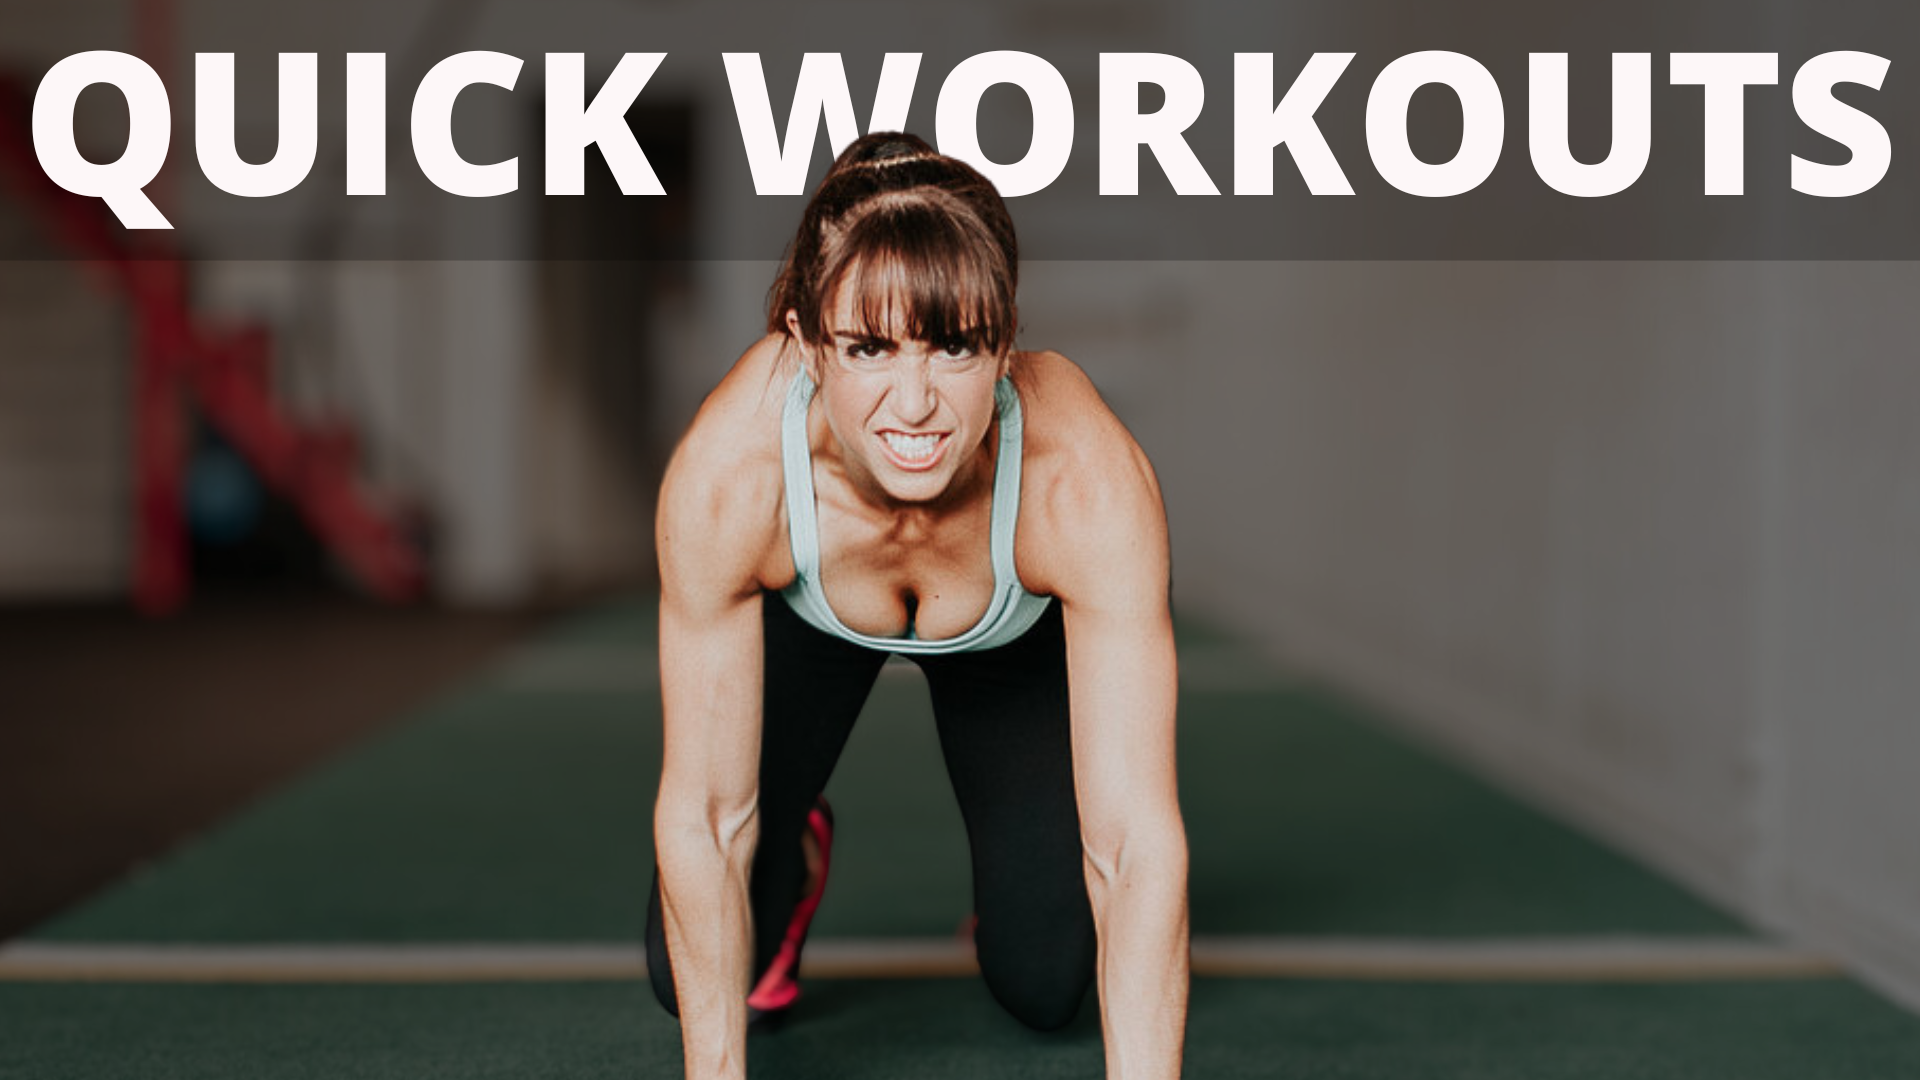 FHP 626 – Designing Quick Workouts That WORK!